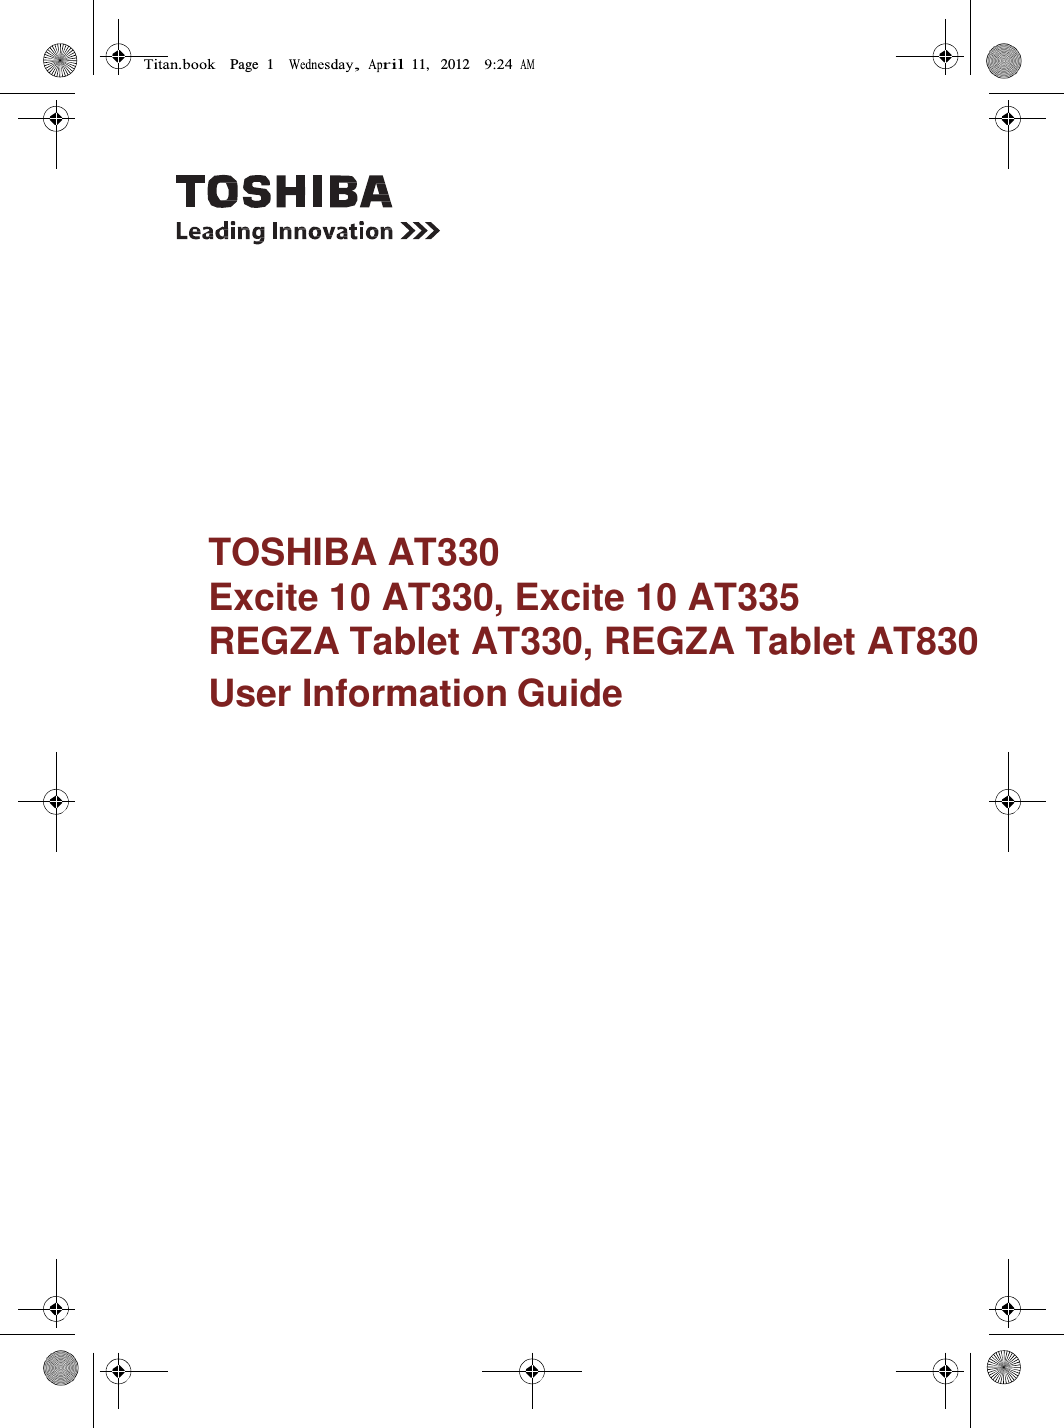 Page  1         11,   2012                          TOSHIBA AT330  Excite 10 AT330, Excite 10 AT335 REGZA Tablet AT330, REGZA Tablet AT830 User Information Guide 